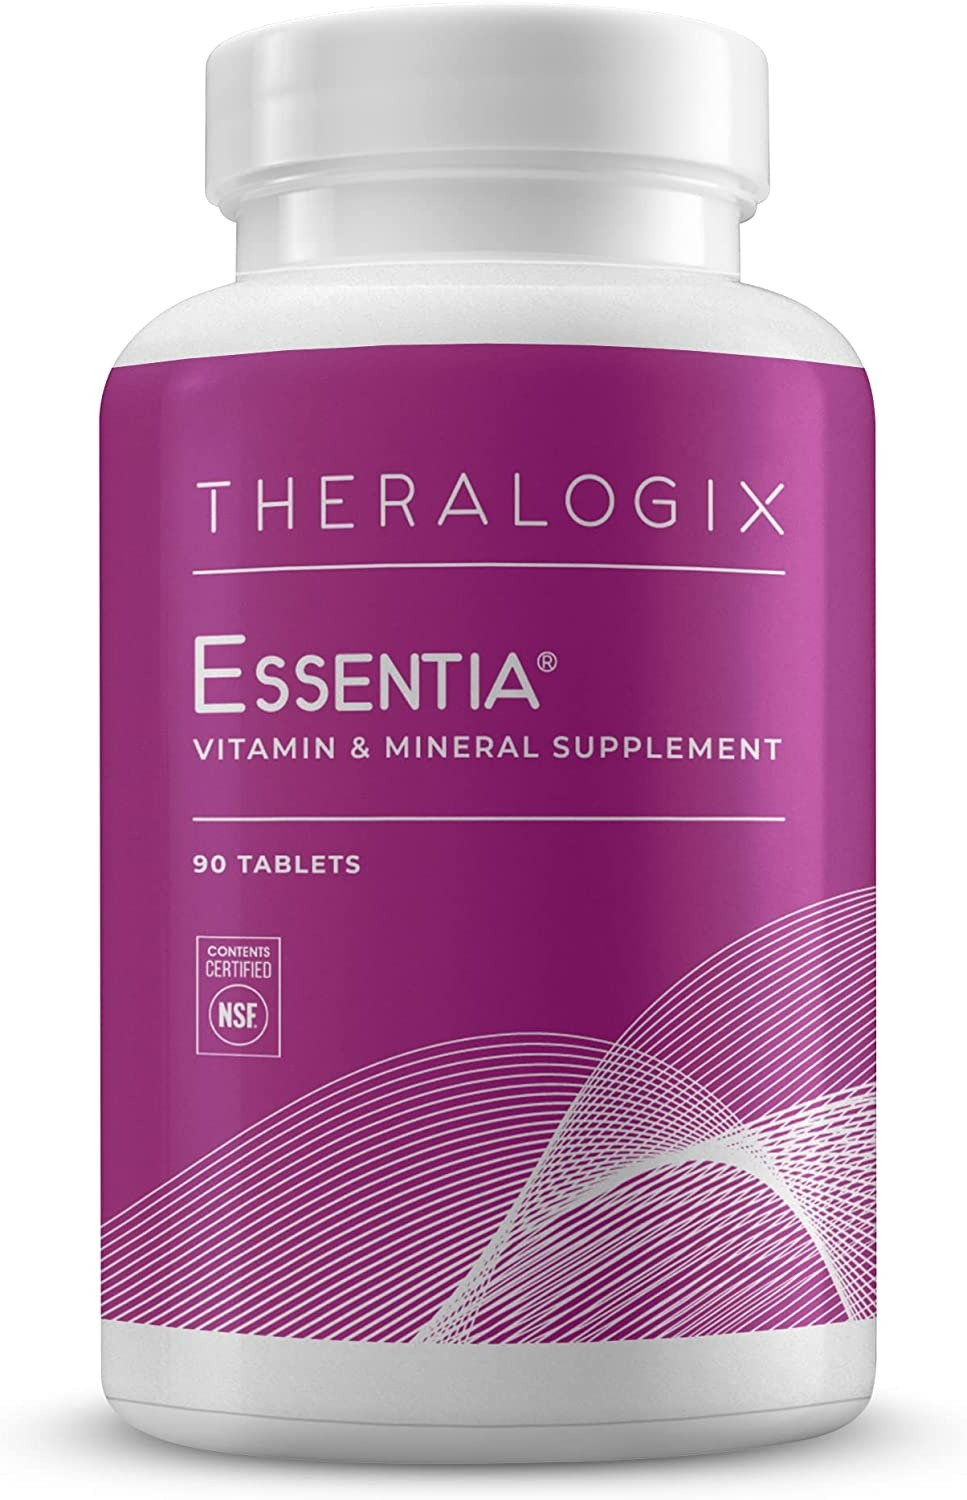 Theralogix Essentia Daily Multivitamin for Women with Iron - 90 Adet